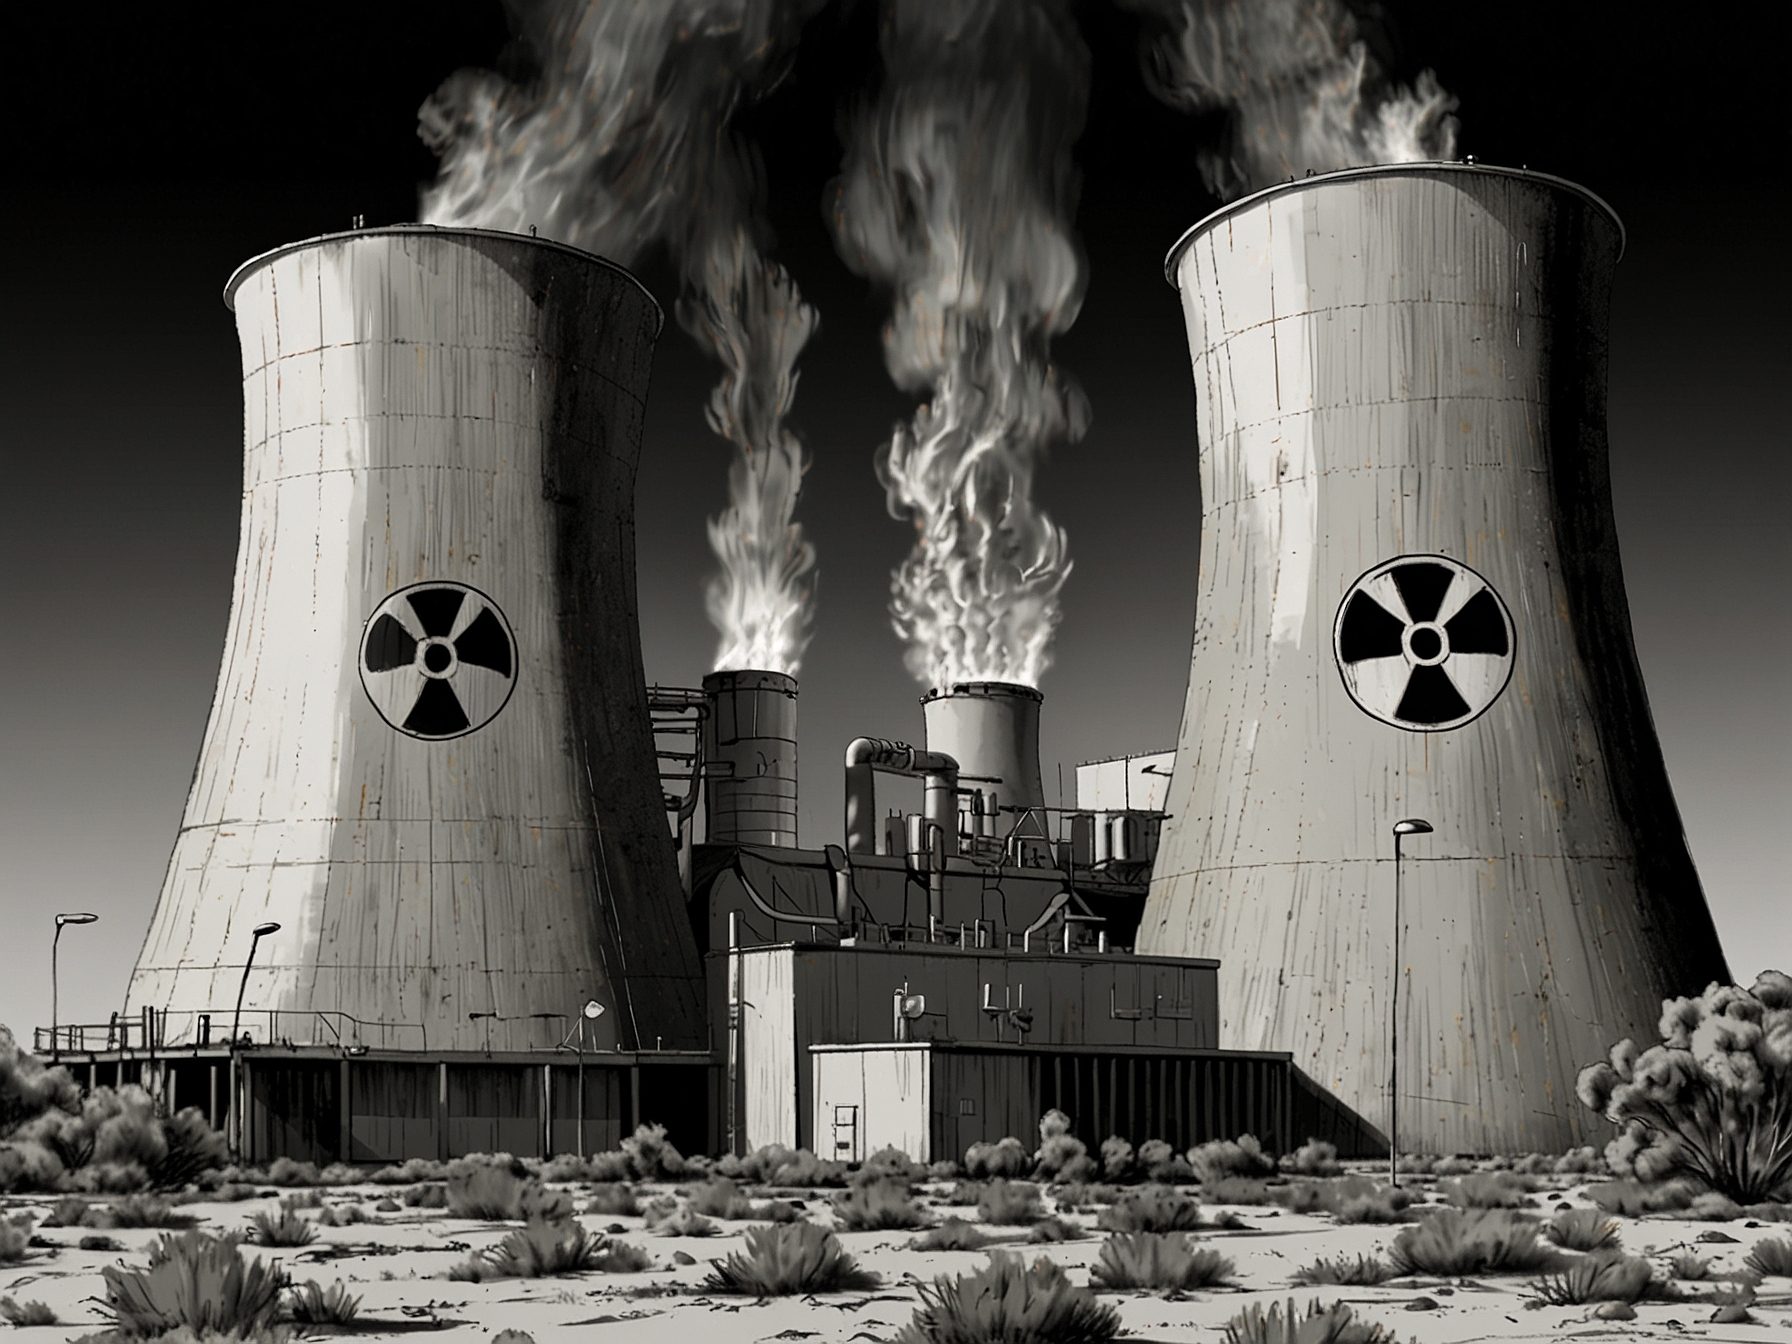 An illustration of a nuclear power plant with question marks, symbolizing the confusion and unanswered questions surrounding the Coalition’s nuclear proposal in Australia.